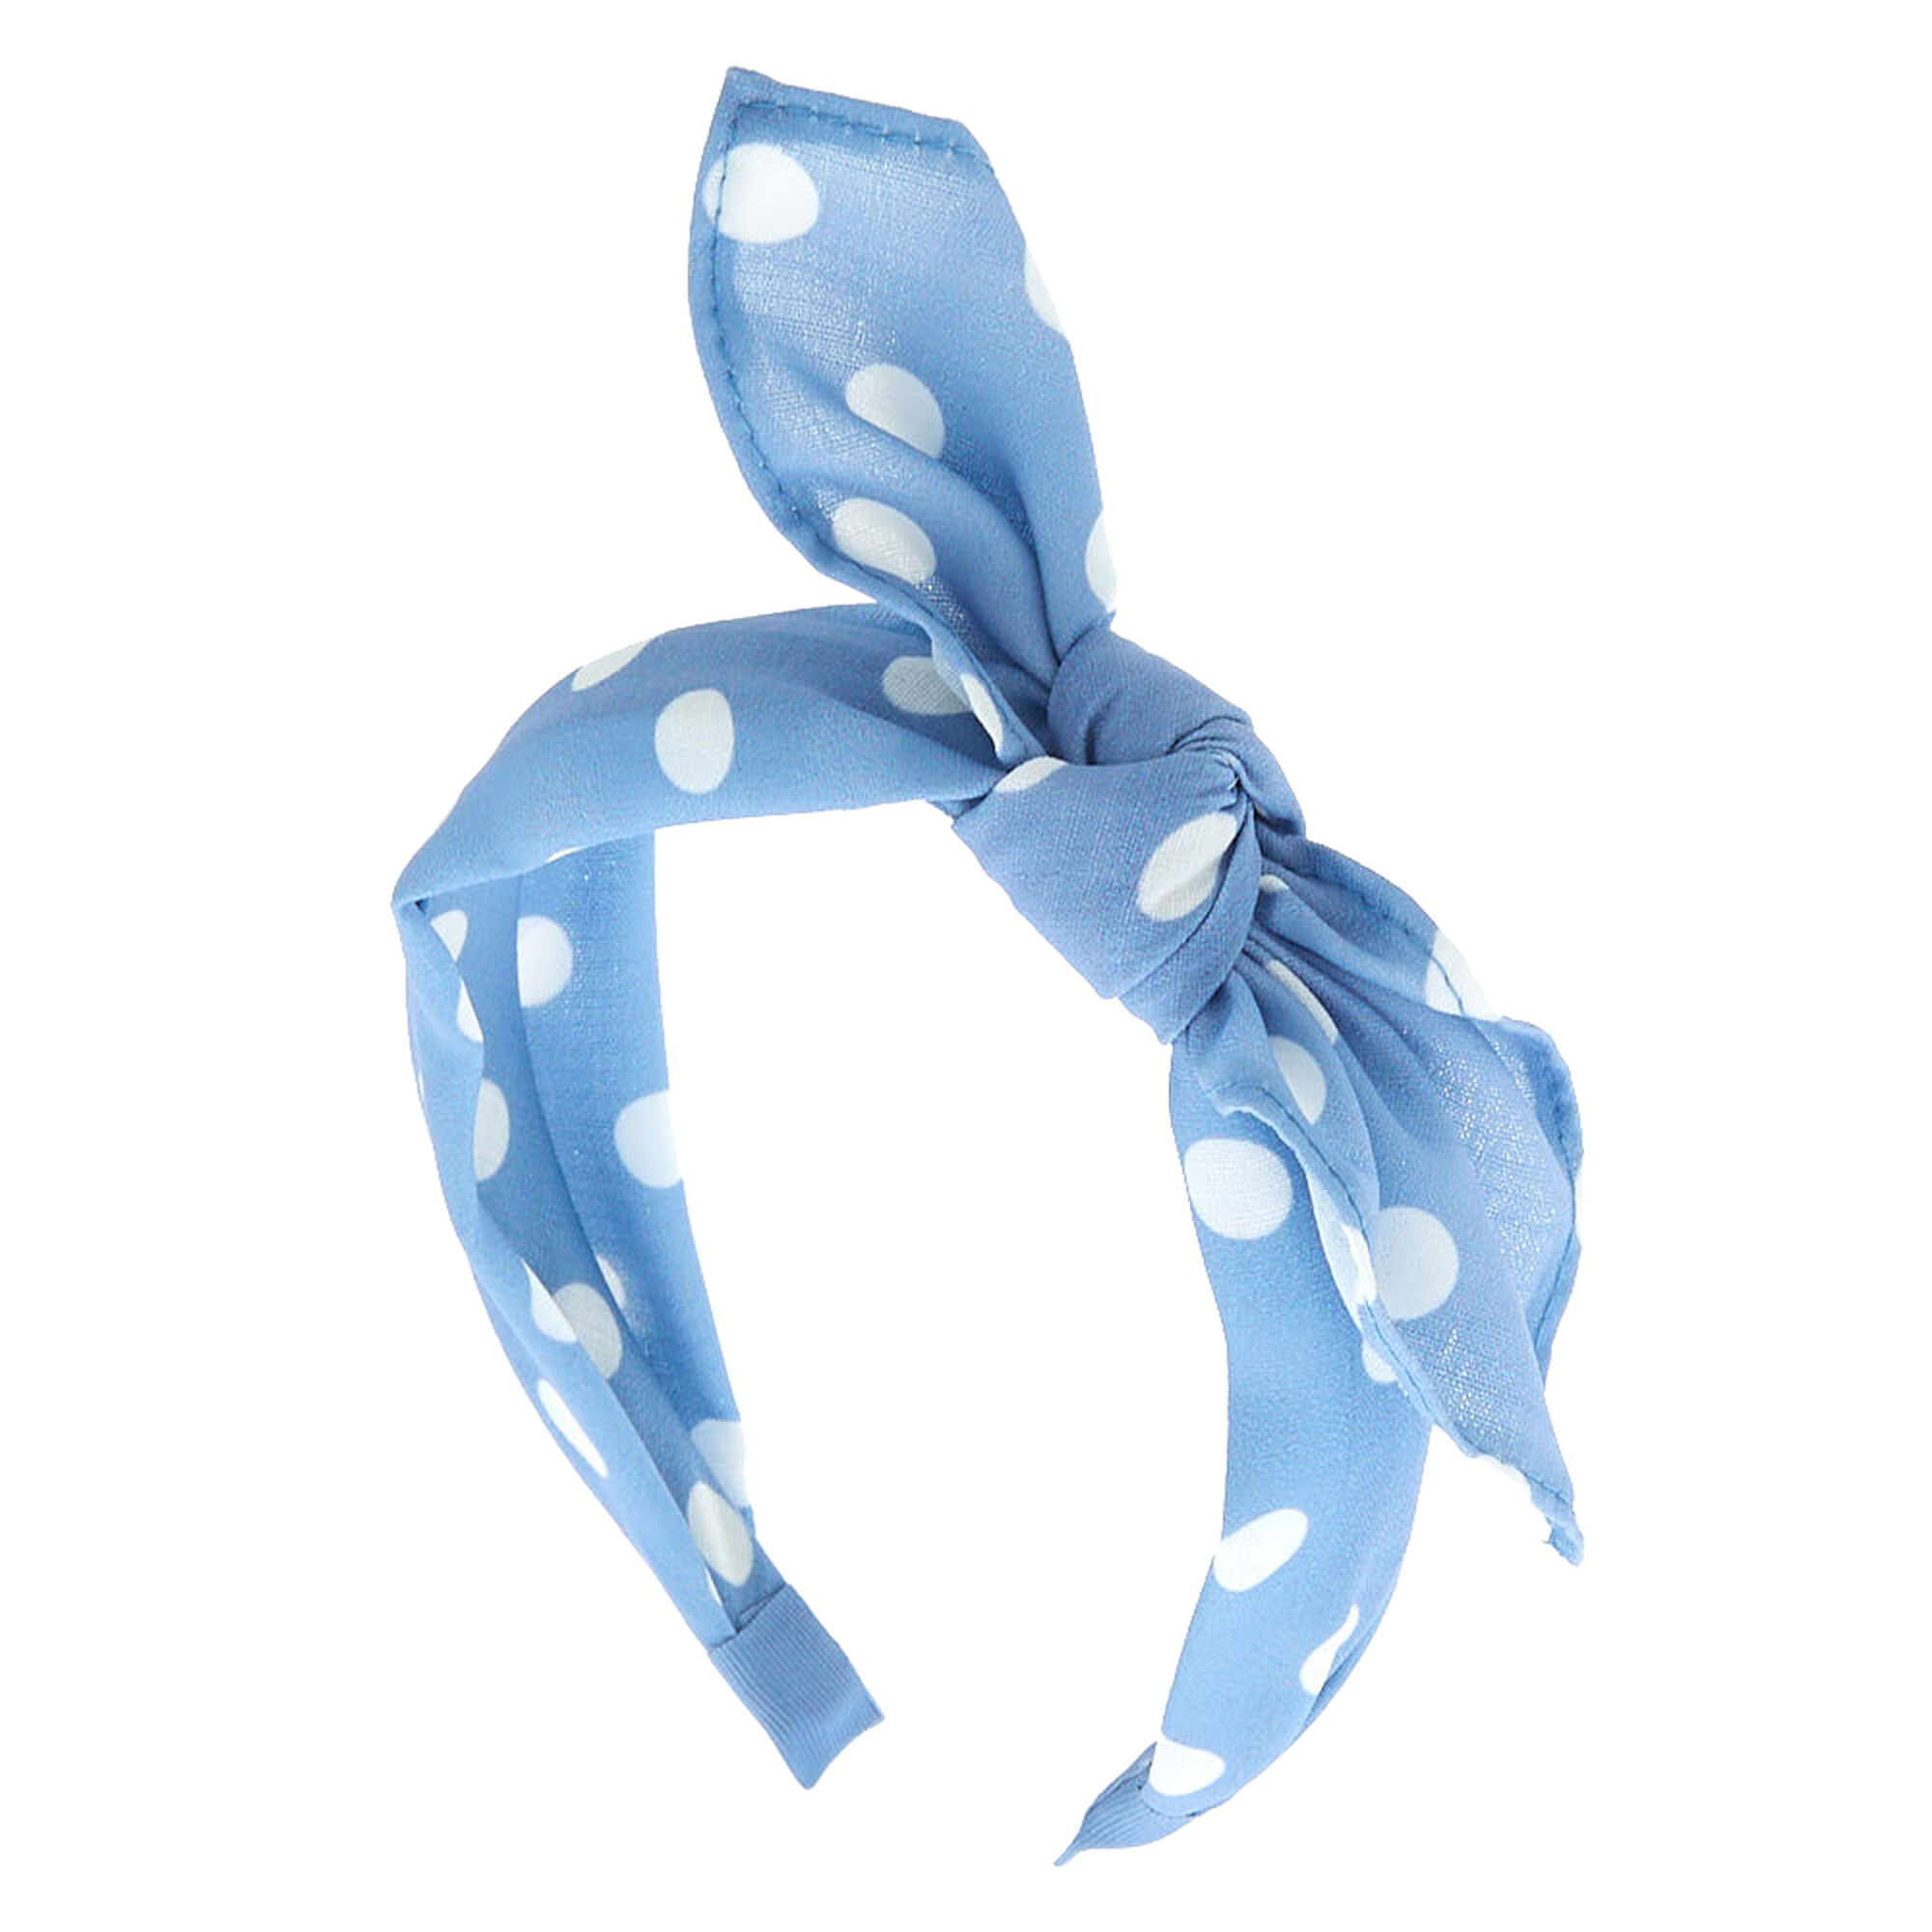 View Claires Polka Dot Bow Headband Baby Blue information